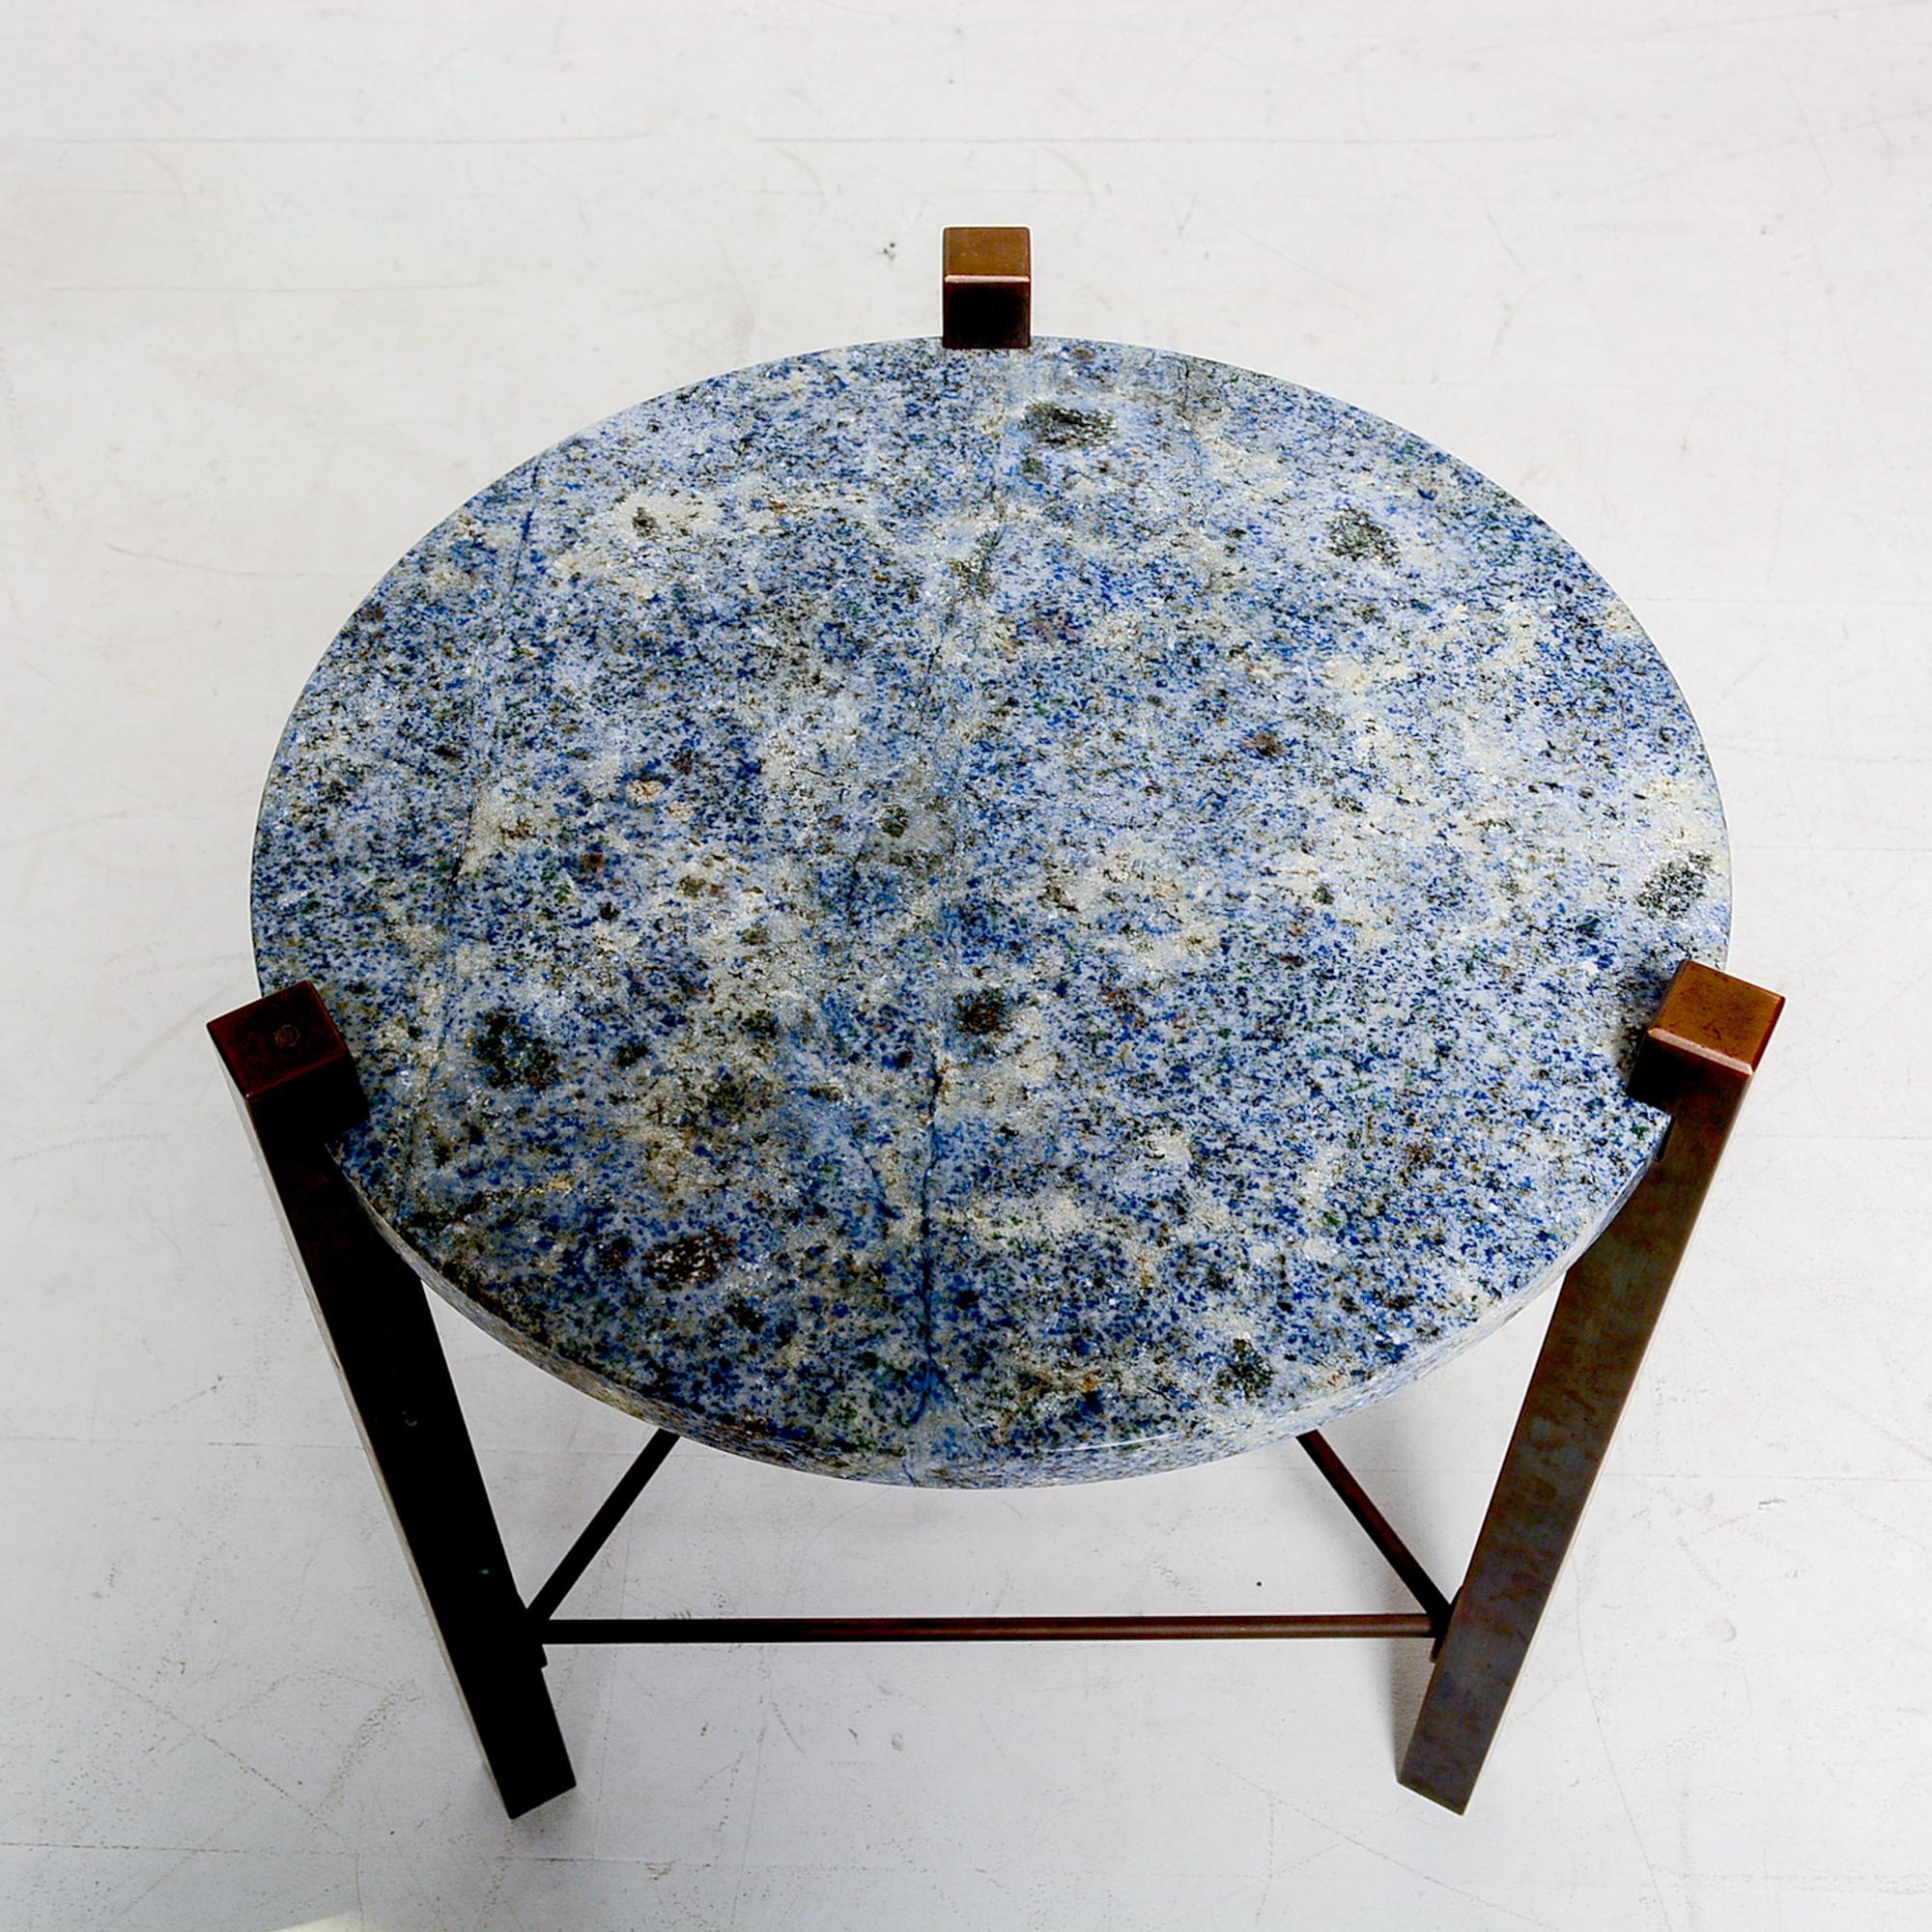 Petite stone top side round table: luscious blue granite with richly patinated bronze frame 1970s modern clean line design
Solid bronze frame with a round top of granite stone in a sea of blue.
No information on the maker is available. Similar to